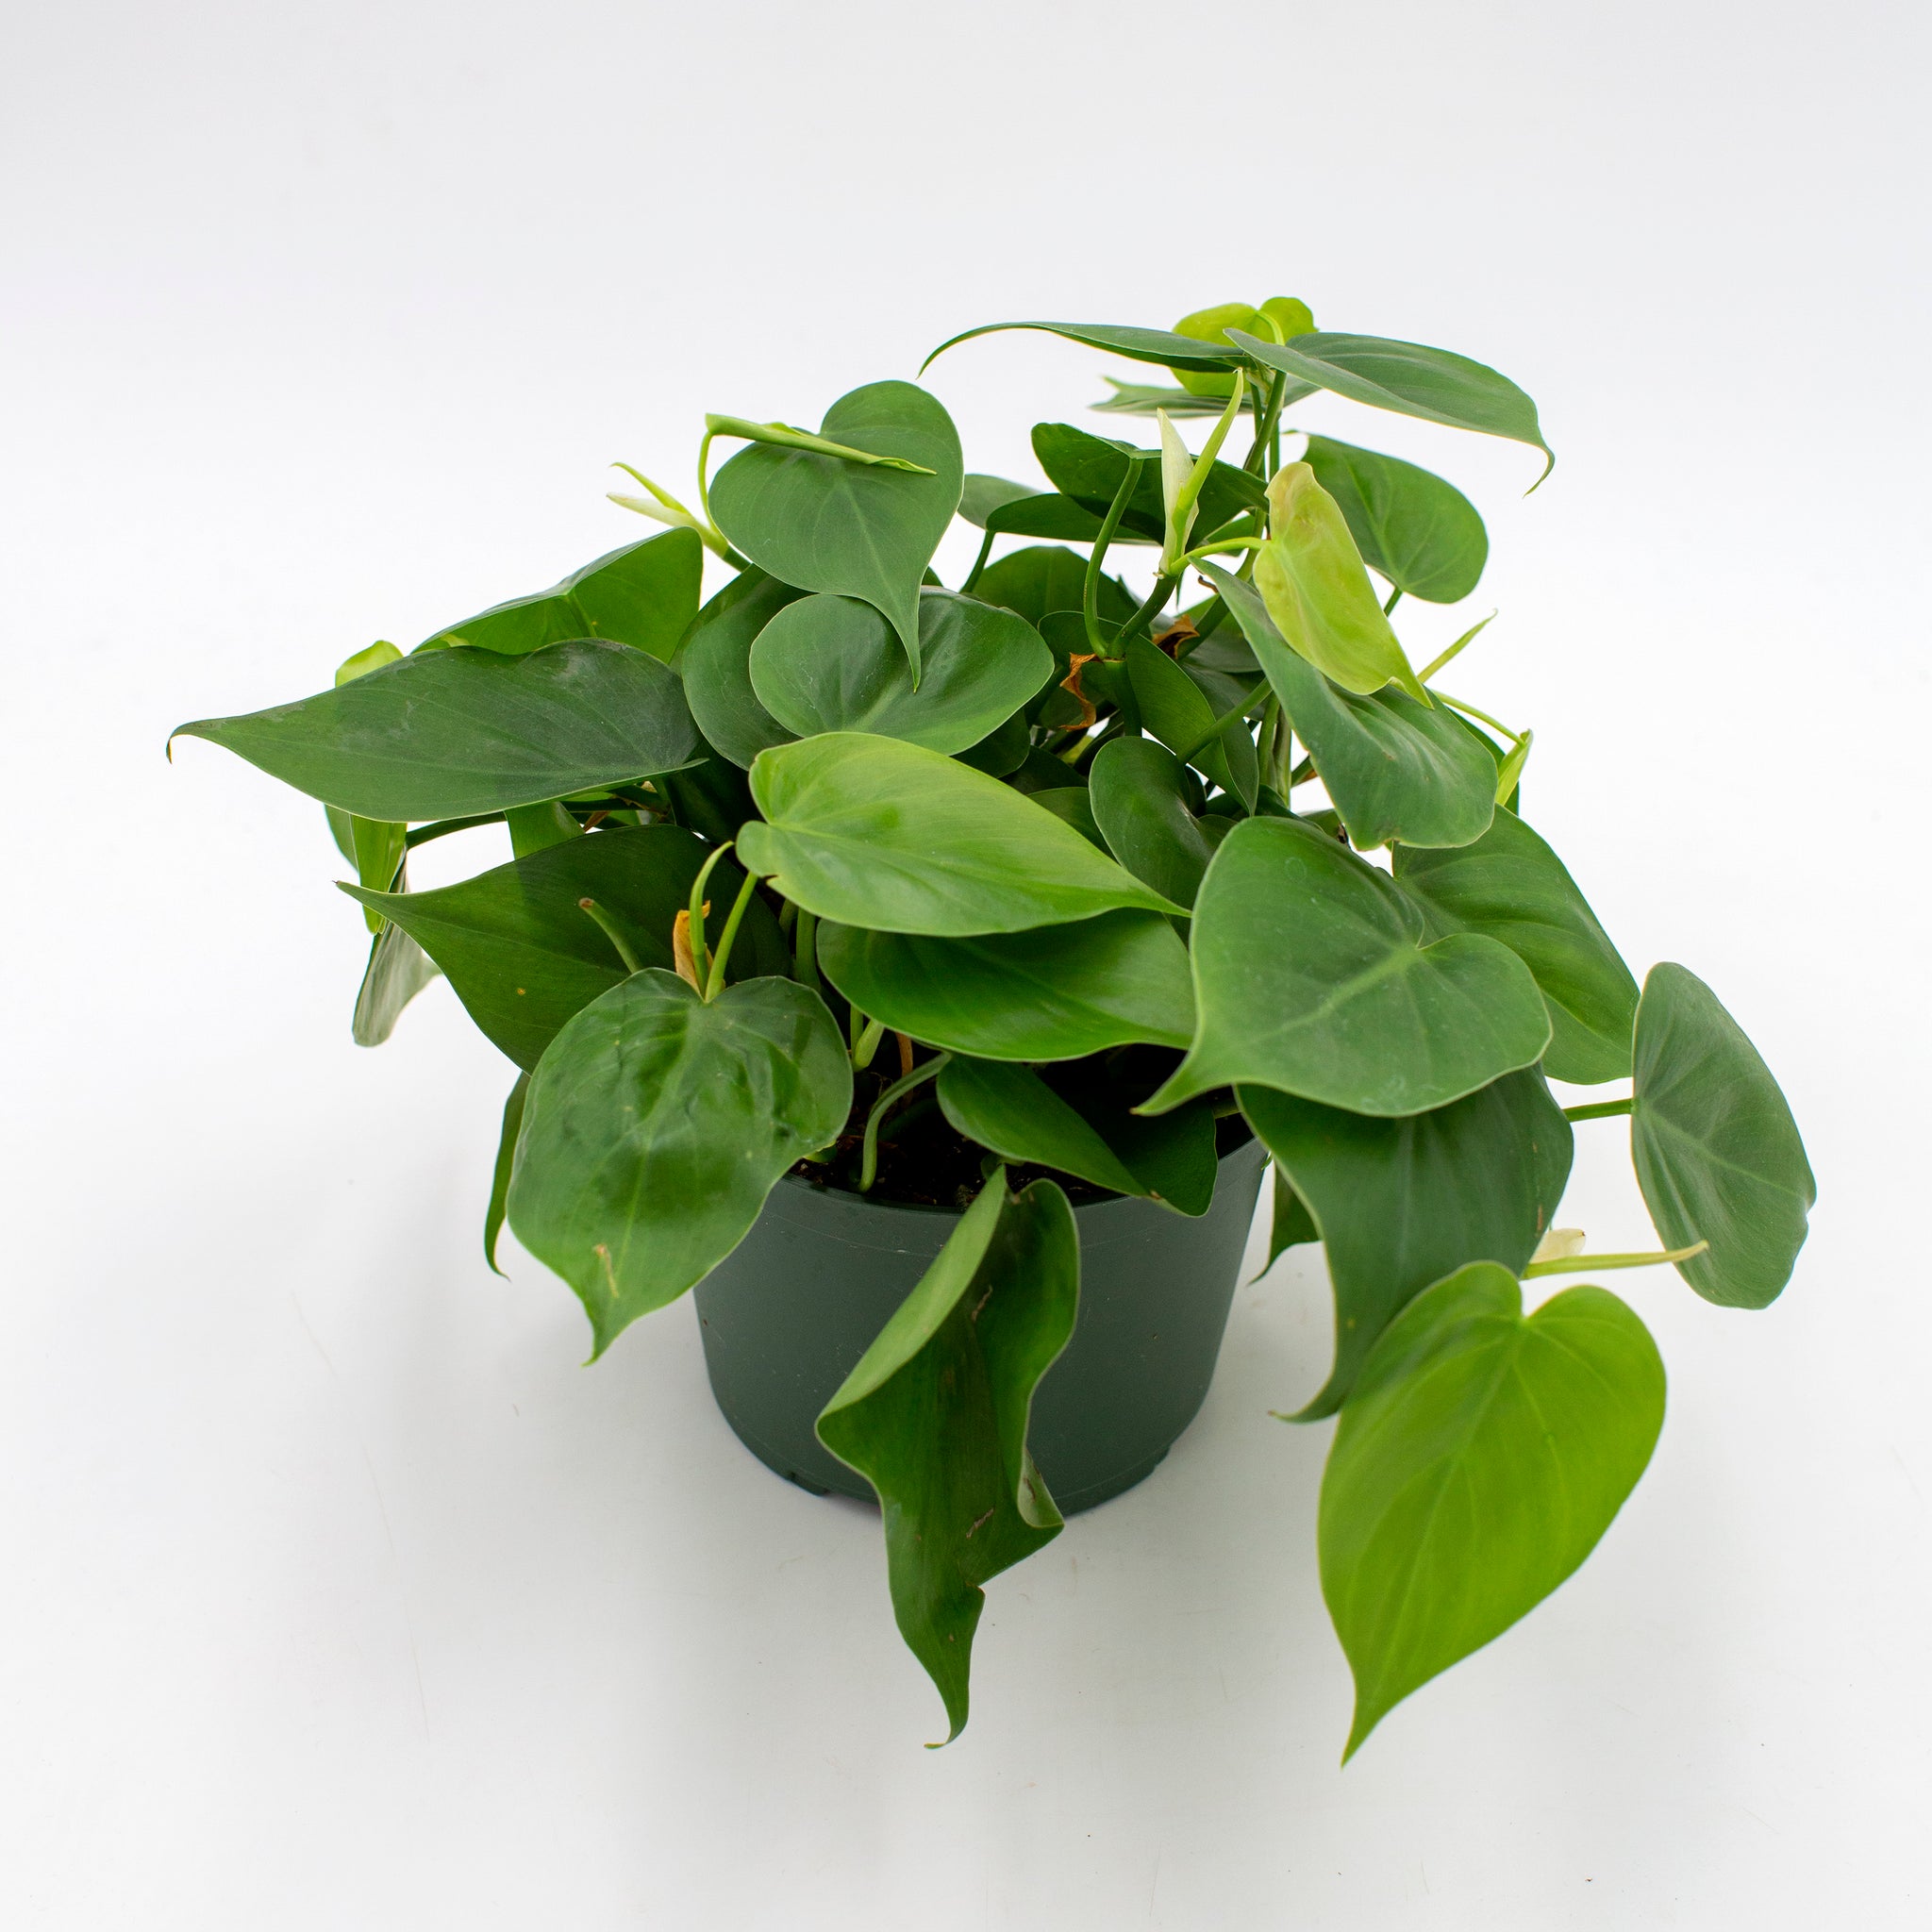 Philodendron cordatum 'Heartleaf Philodendron'